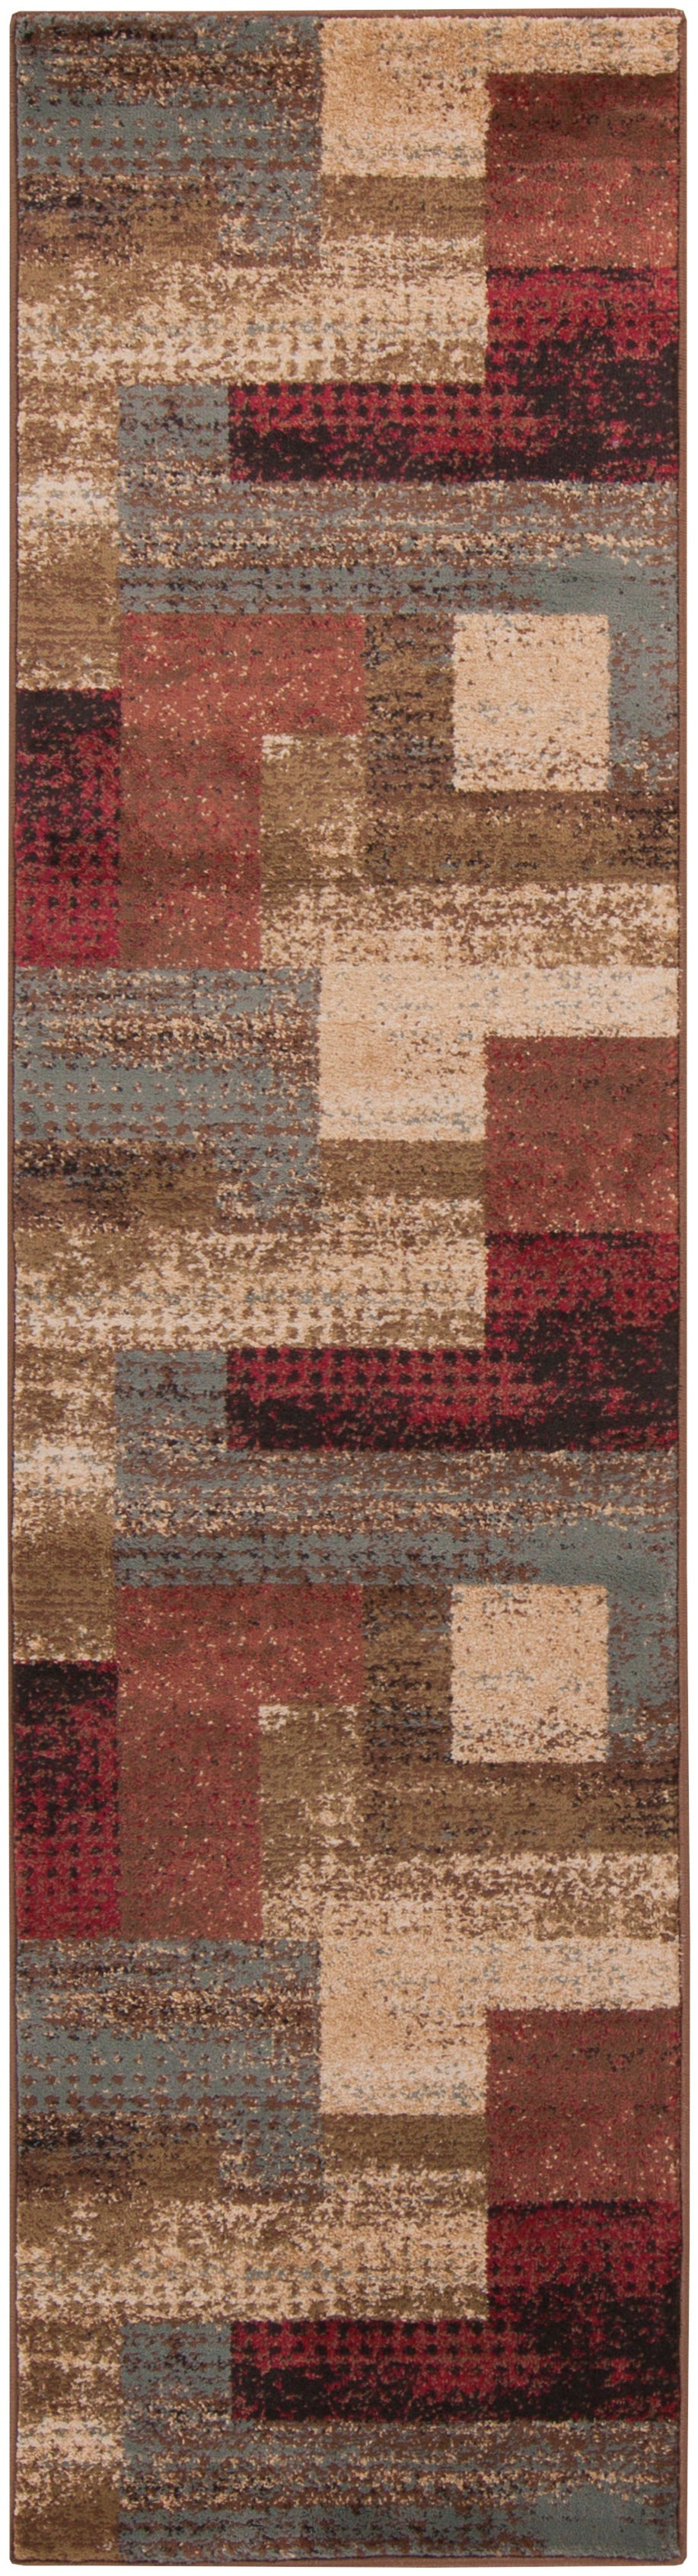 Surya Riley RLY5004 Red/Brown Contemporary Area Rug